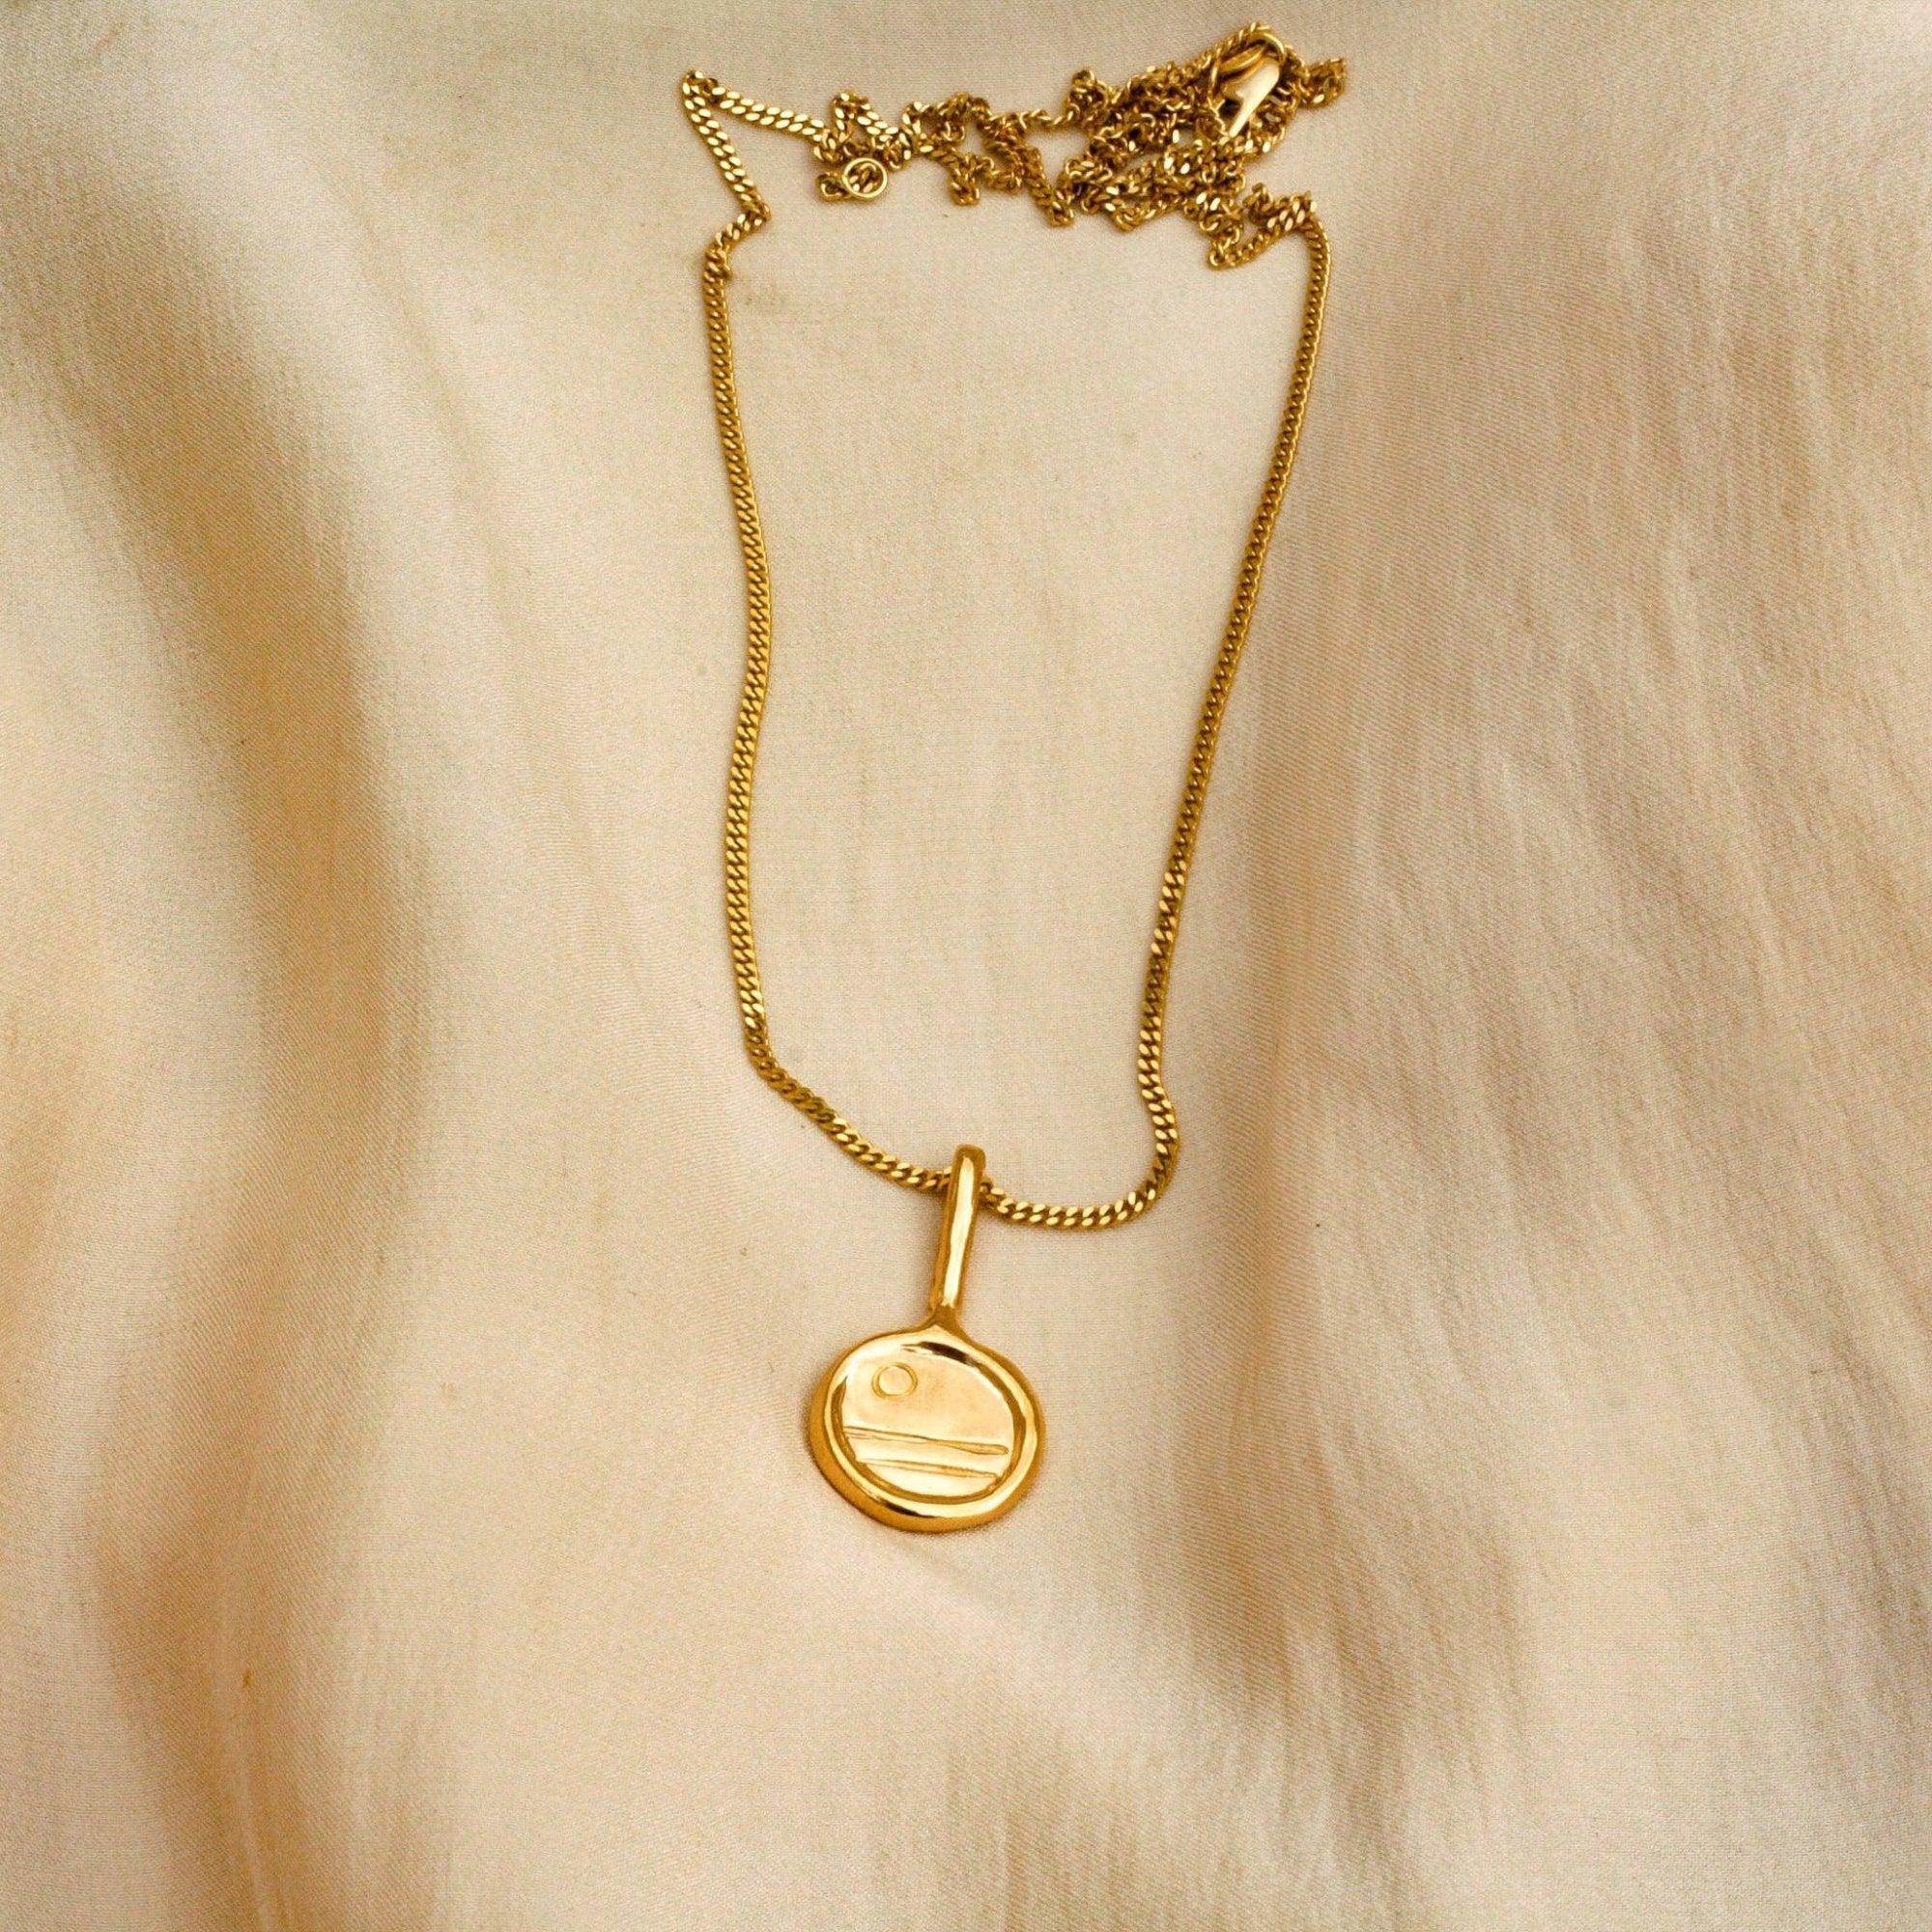 GOLDEN HOUR NECKLACE - RECYCLED SILVER - THE SUS&TAIN STORE